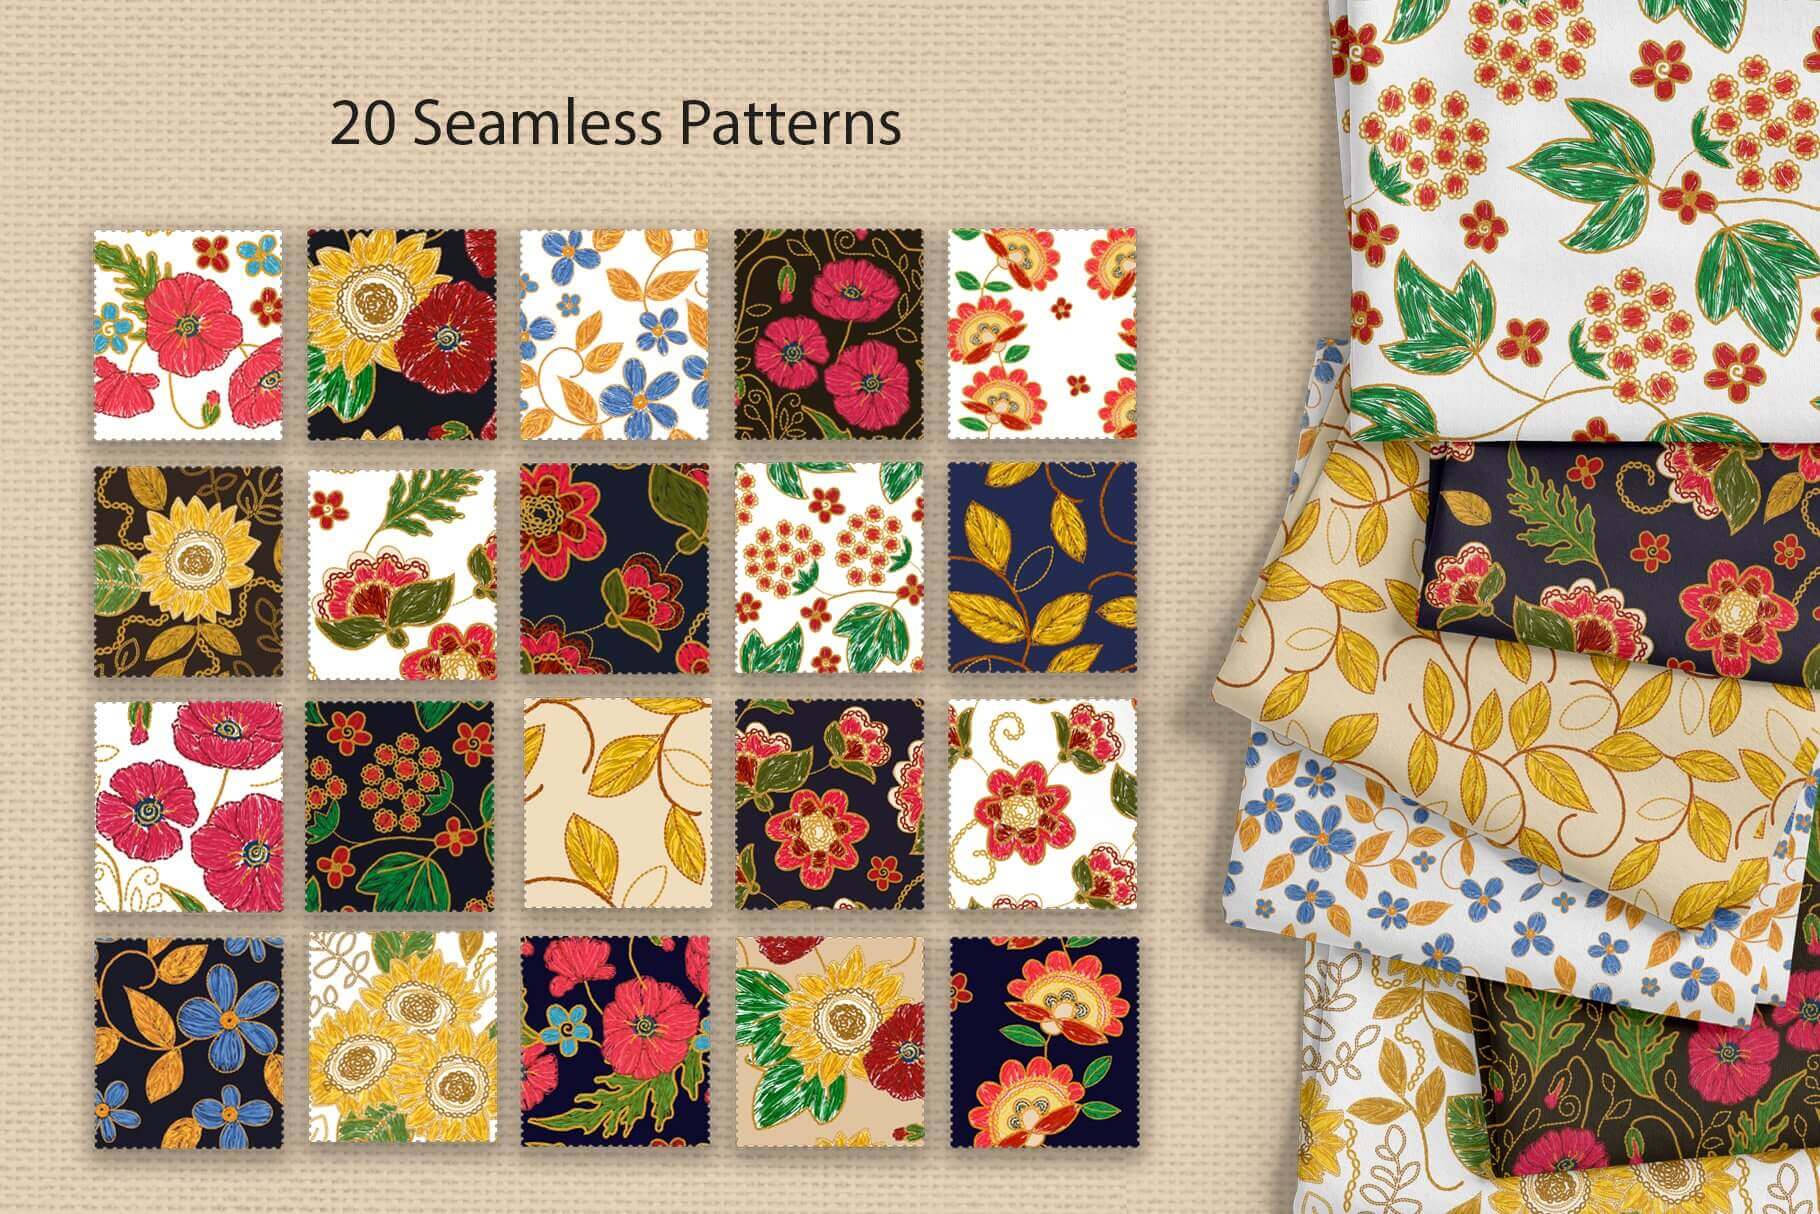 20 seamless Ukrainian patterns with different flowers on the different backgrounds.